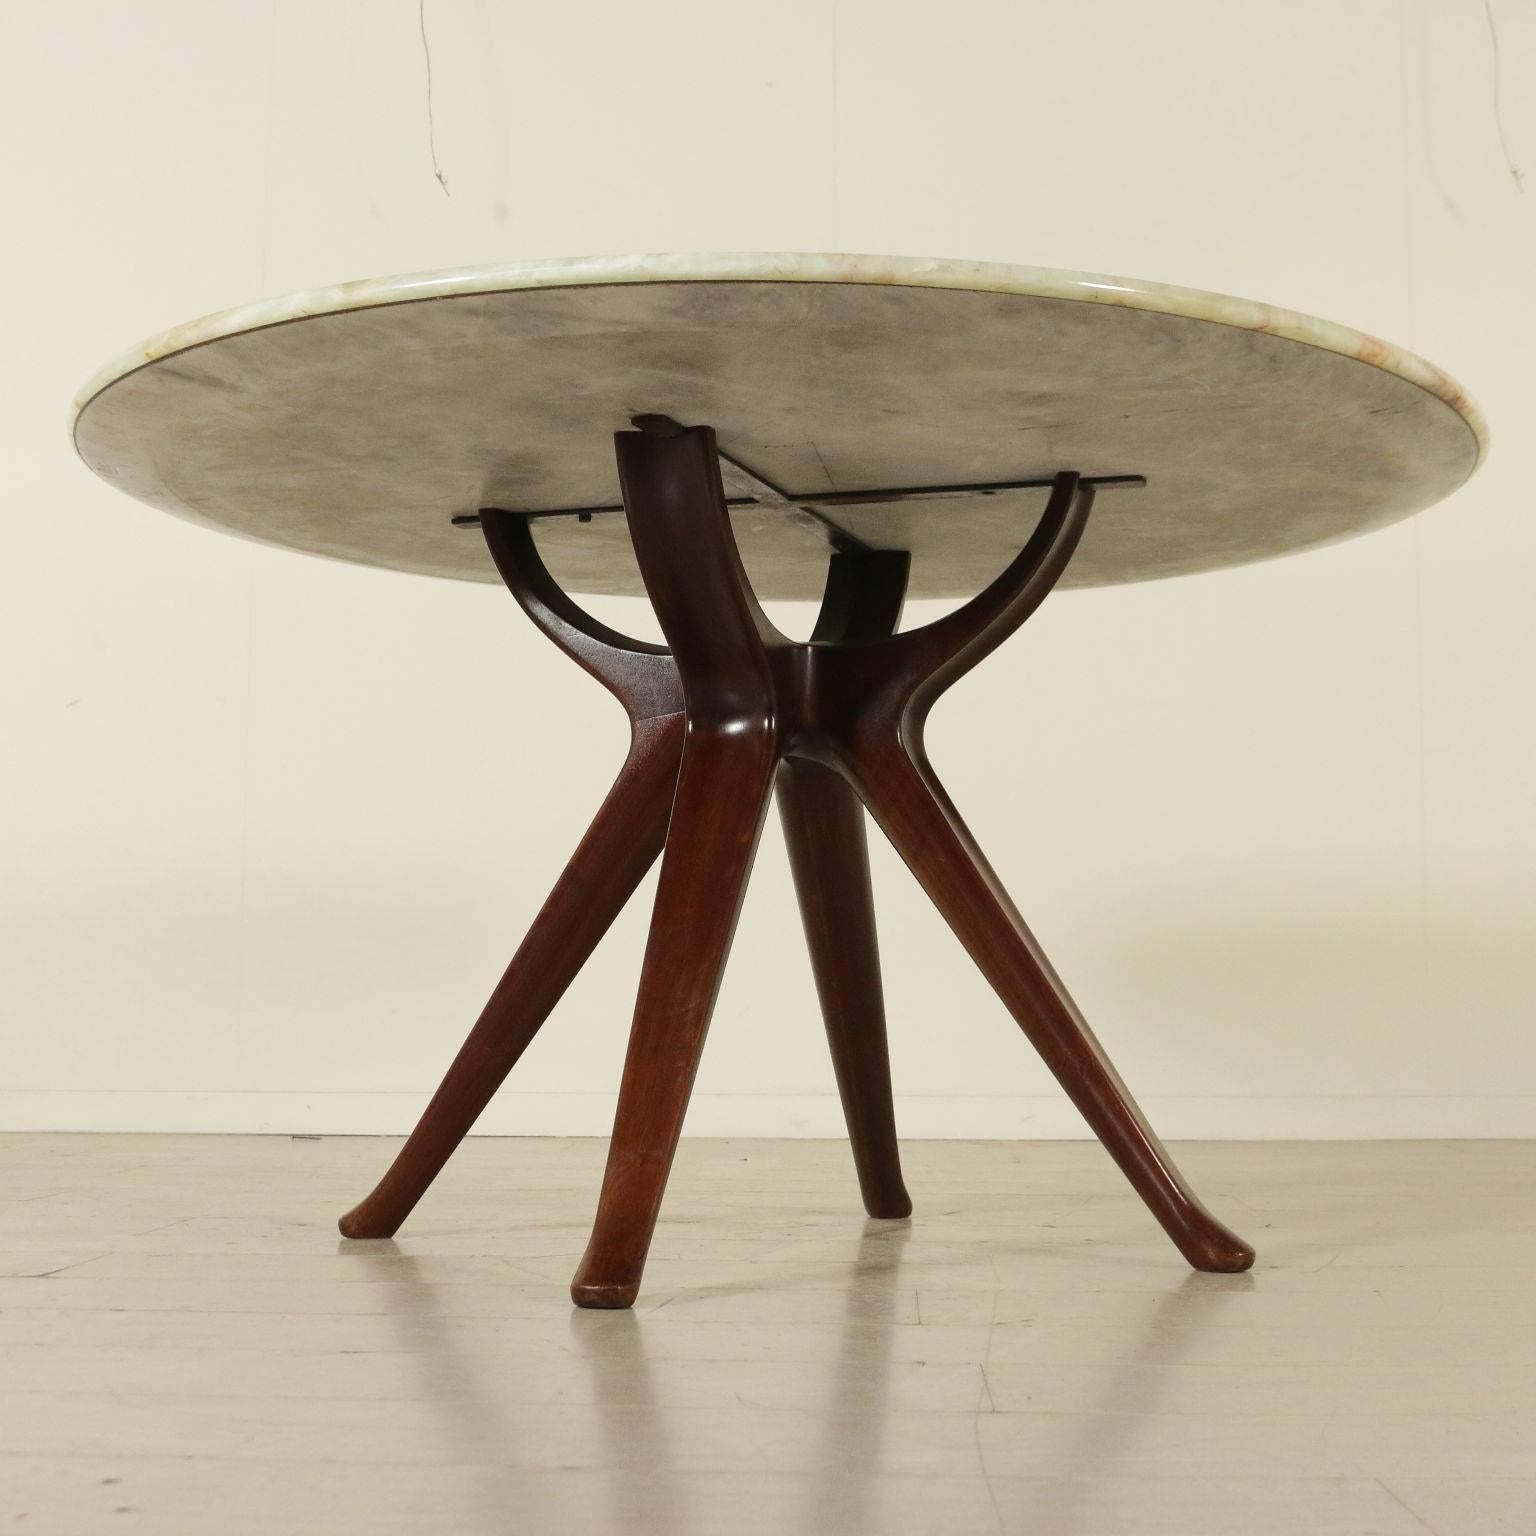 A table designed by Osvaldo Borsani (1911-1985), mahogany basement and onyx top. Manufactured in Italy, 1950s.